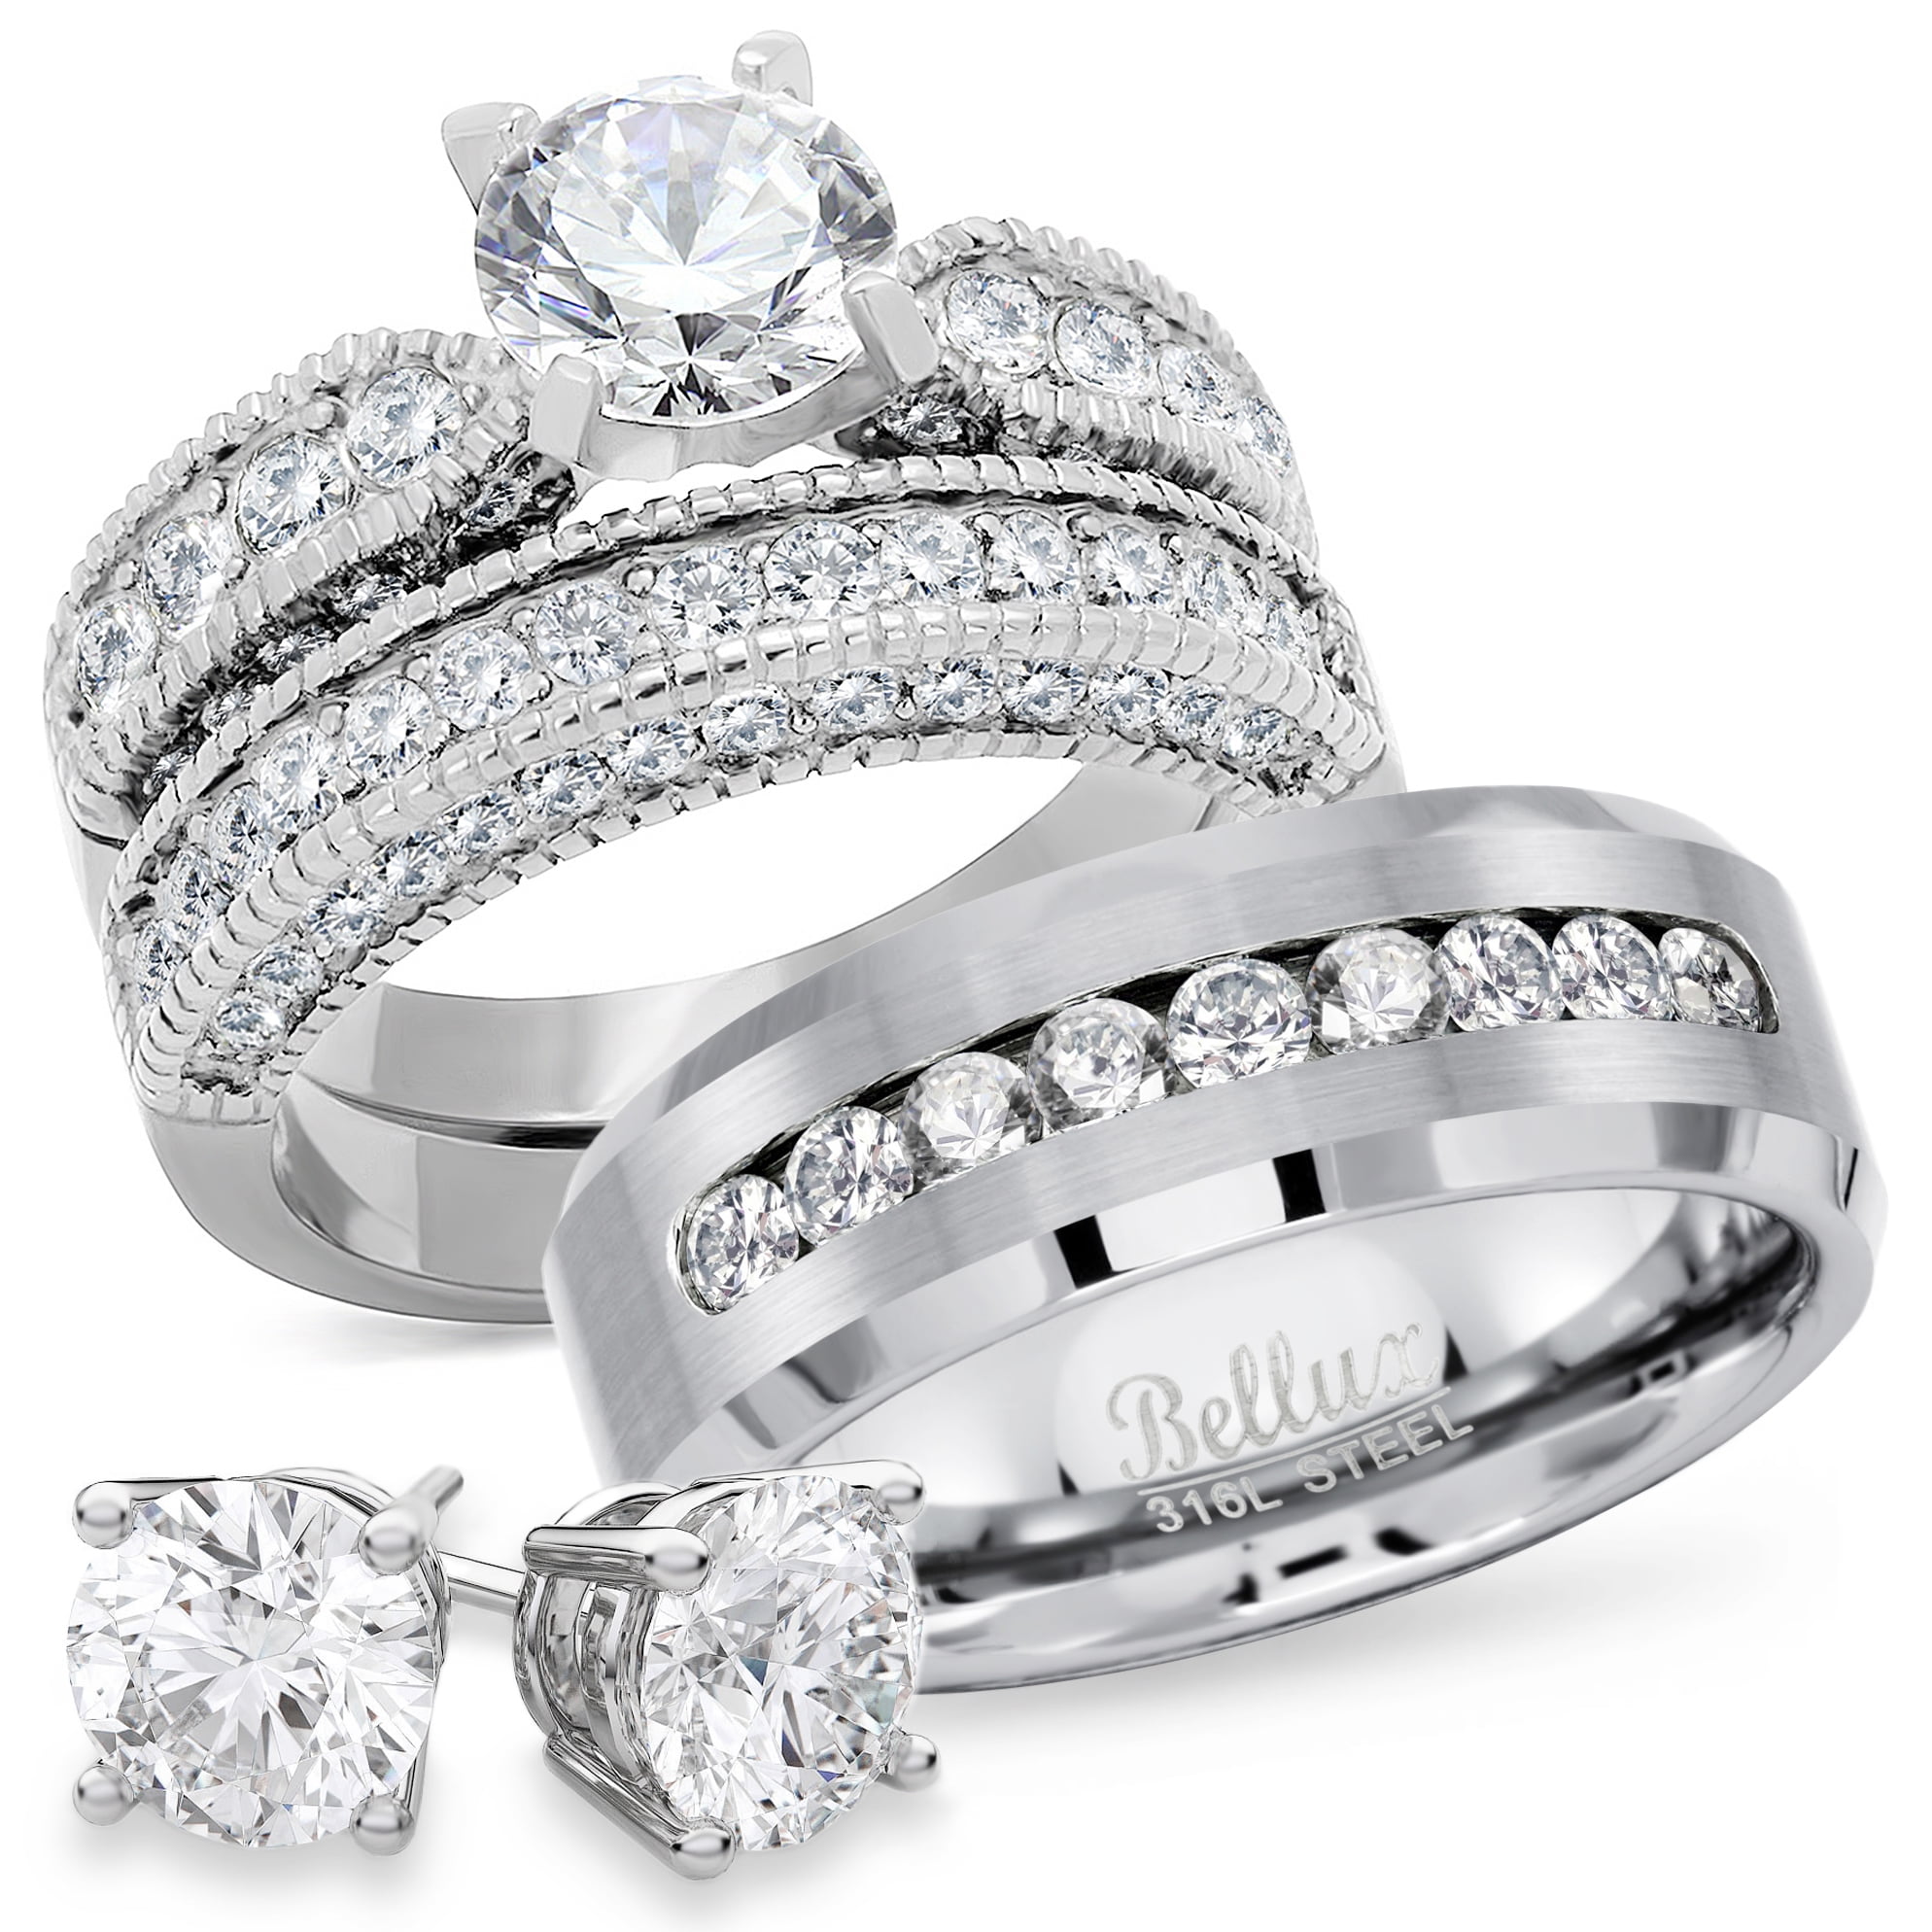 Details about   His & Hers Stainless Steel Princess CZ Wedding Ring Set Steel Men Band Stud 